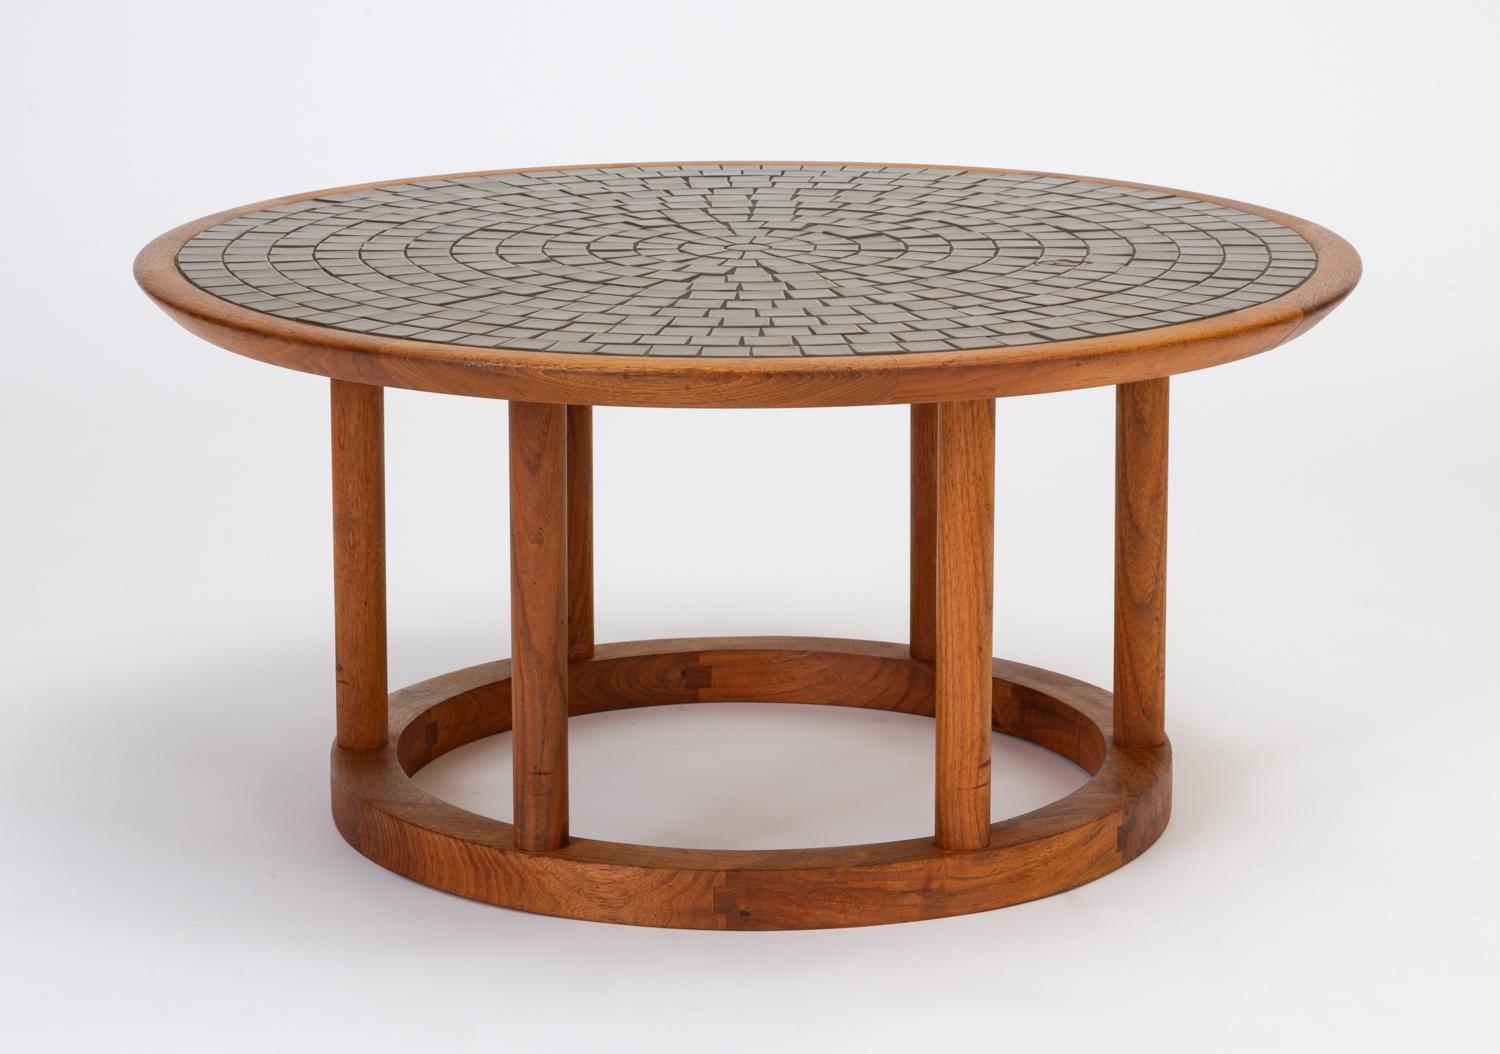 This round Gordon & Jane Martz occasional table has a mosaic top of sage and olive green square tiles in a sunburst formation, set into a solid walnut base. The top is supported by wooden legs rising from a smaller, round pedestal base. Versatile